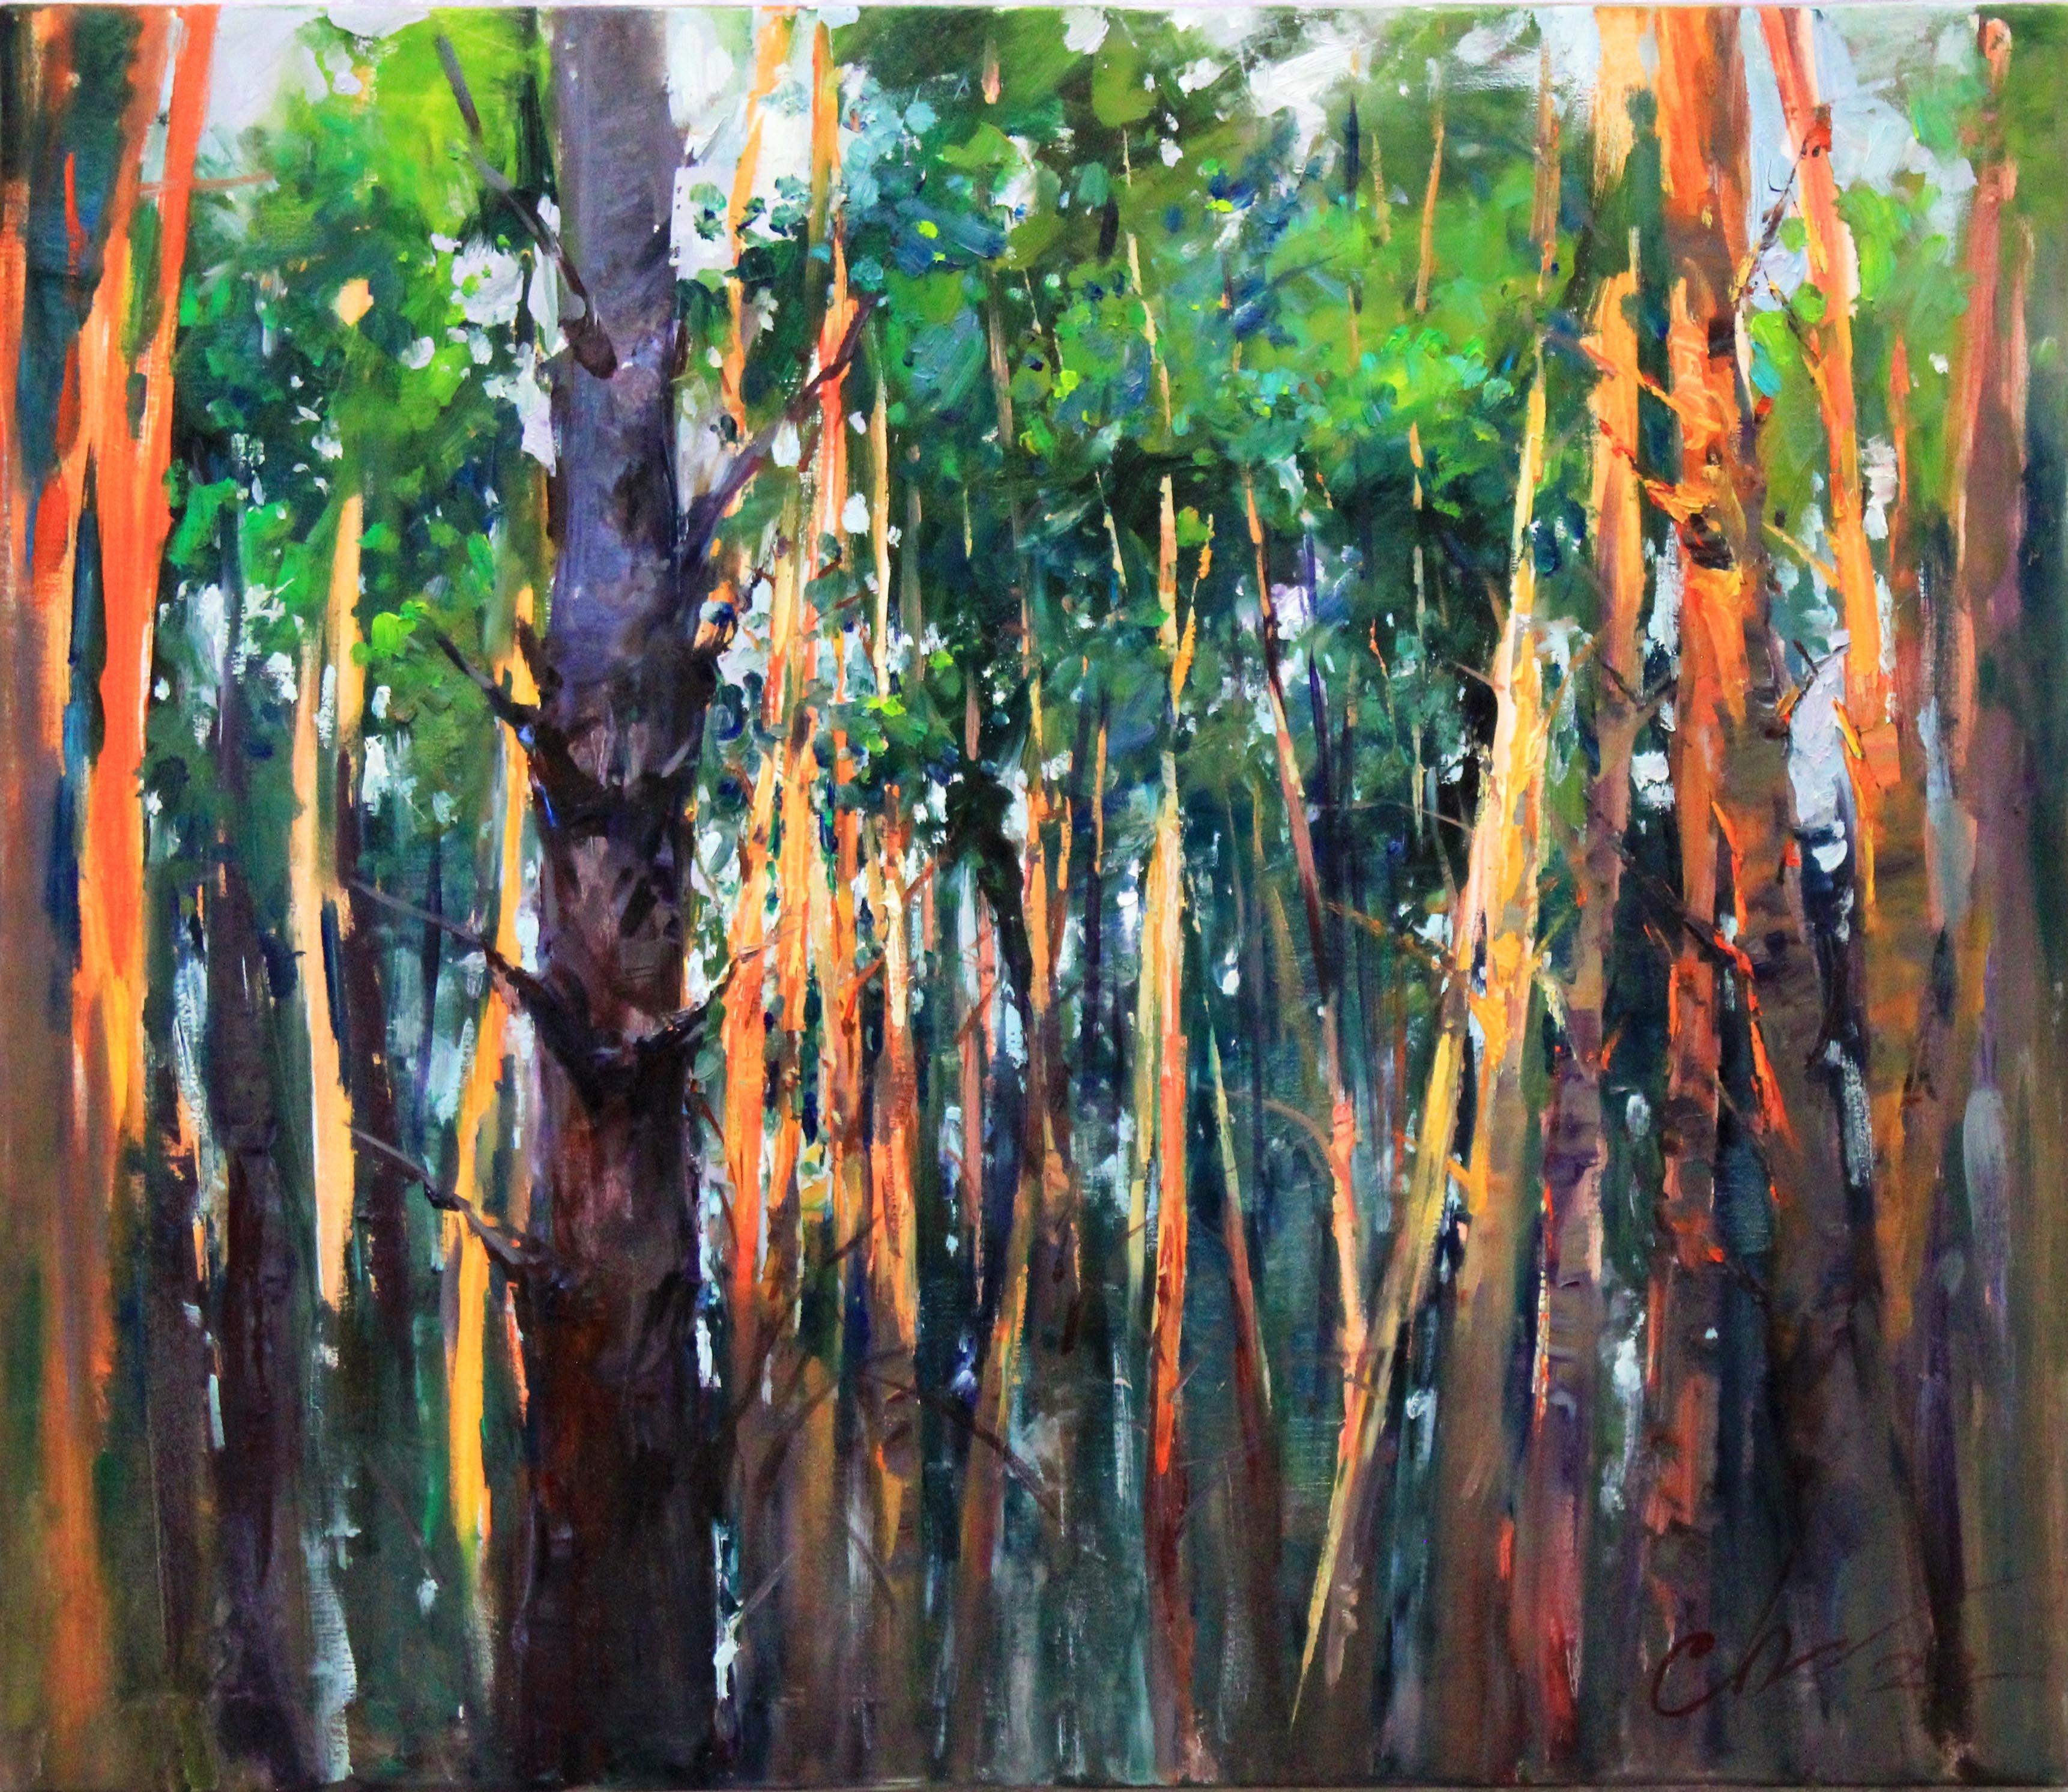 The beauty of the forest inspired the artist to create the painting œPine Forest